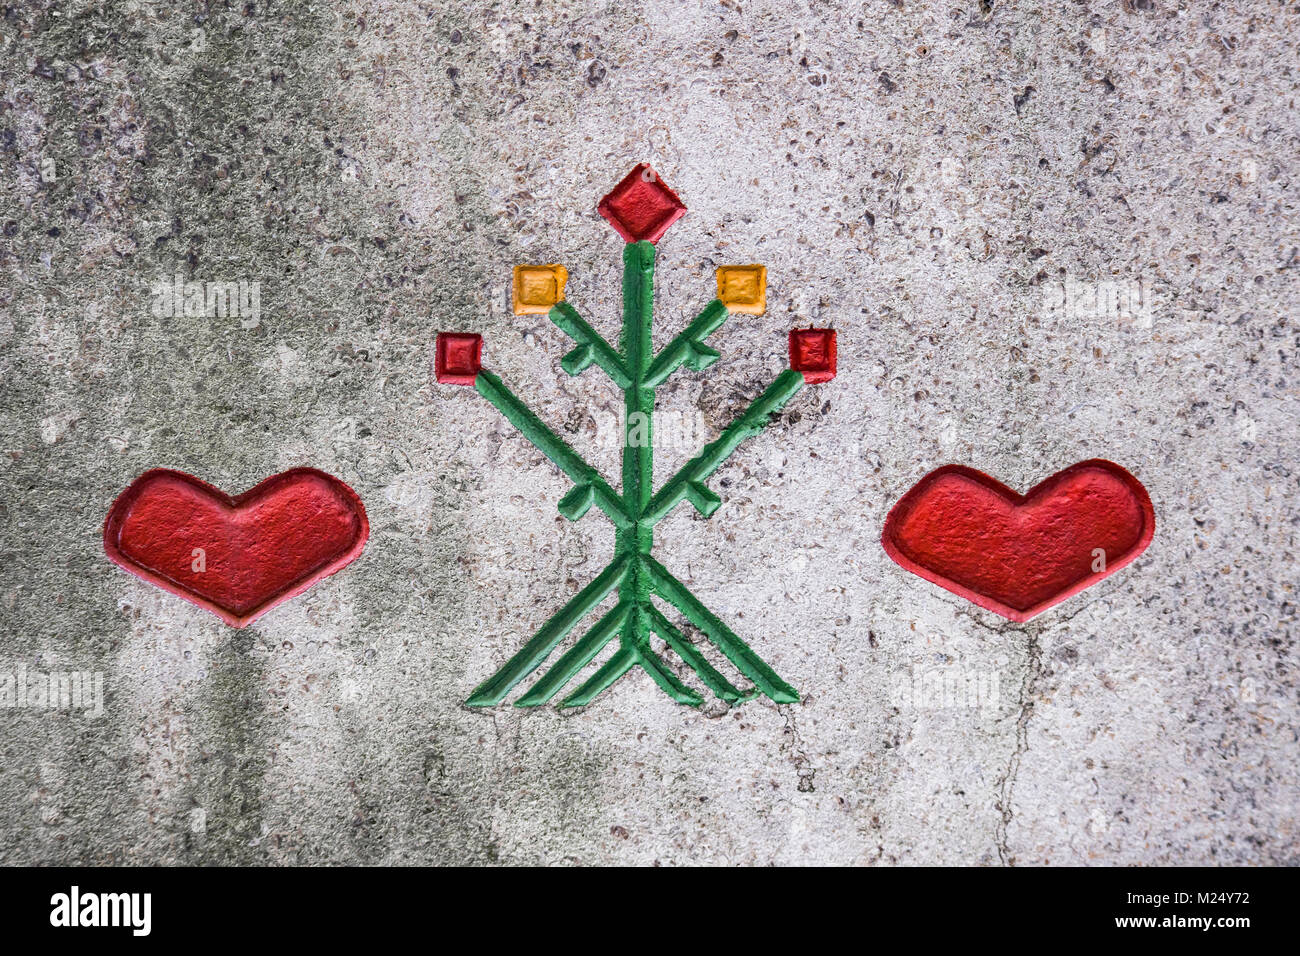 hearts and flower, painting, symbolic, at Schwälmer Brunnen or Schwalm Well, Alsfeld, Germany Stock Photo